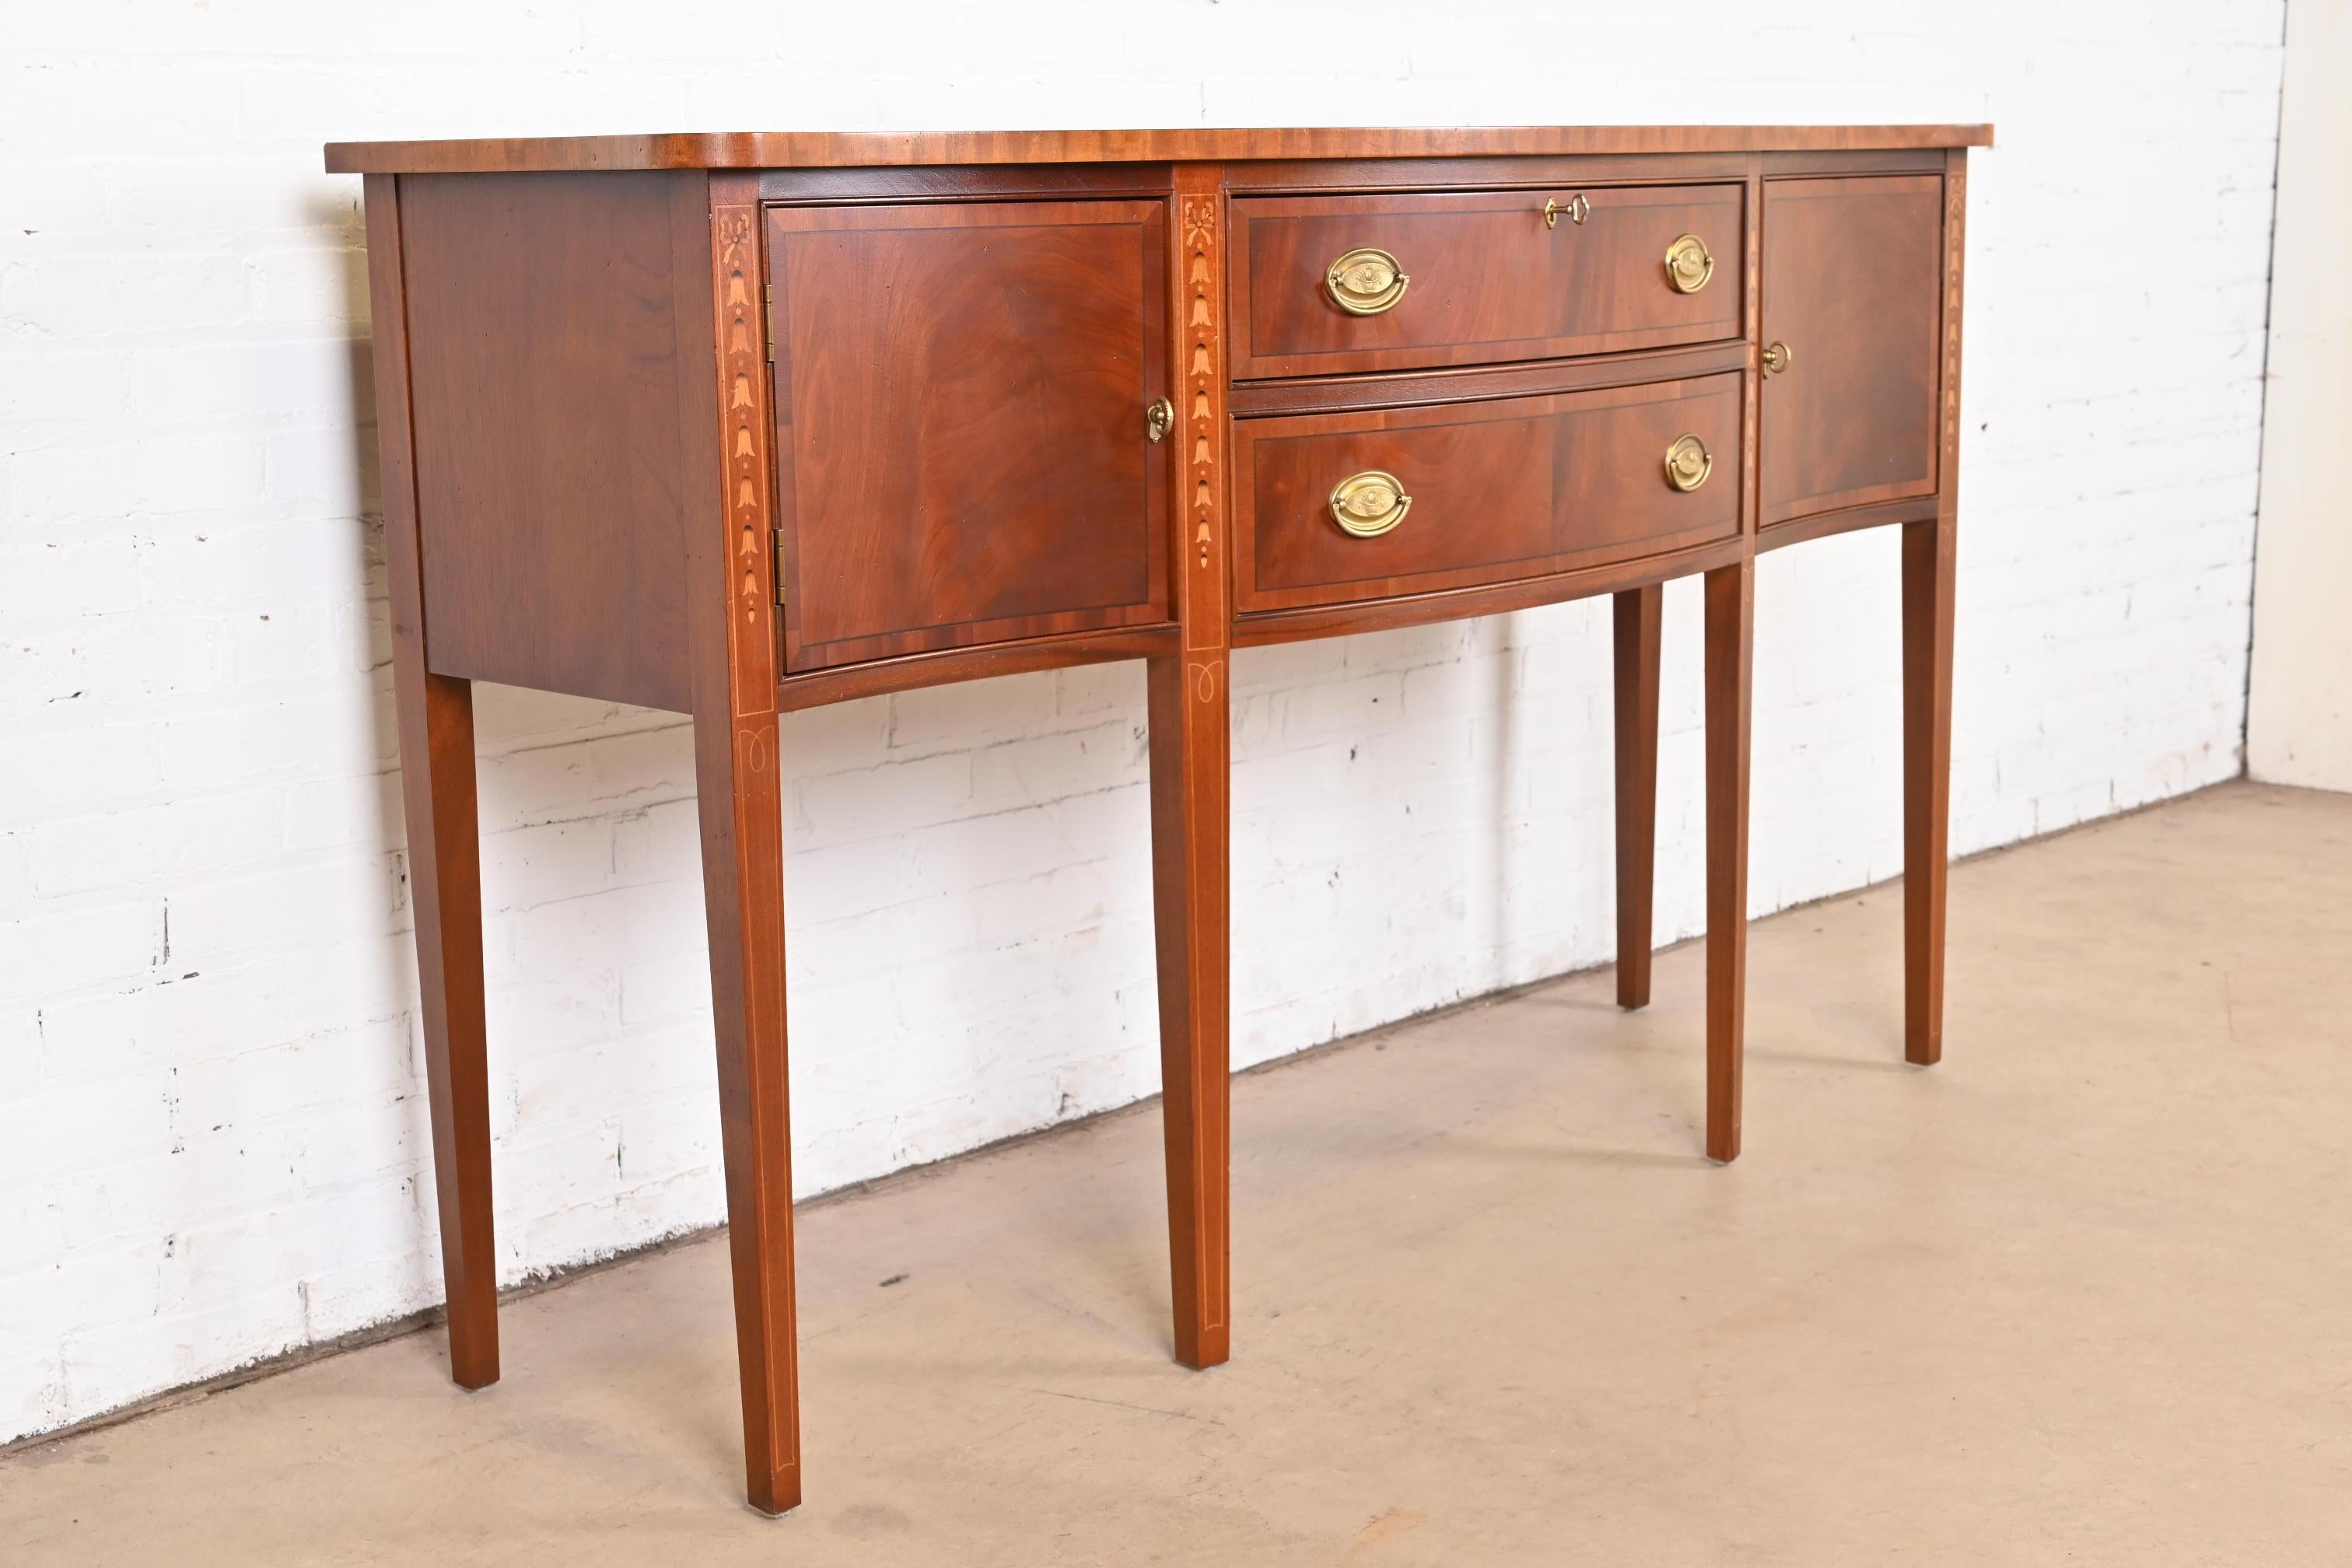 Brass Hepplewhite Inlaid Mahogany Serpentine Front Sideboard Buffet or Credenza